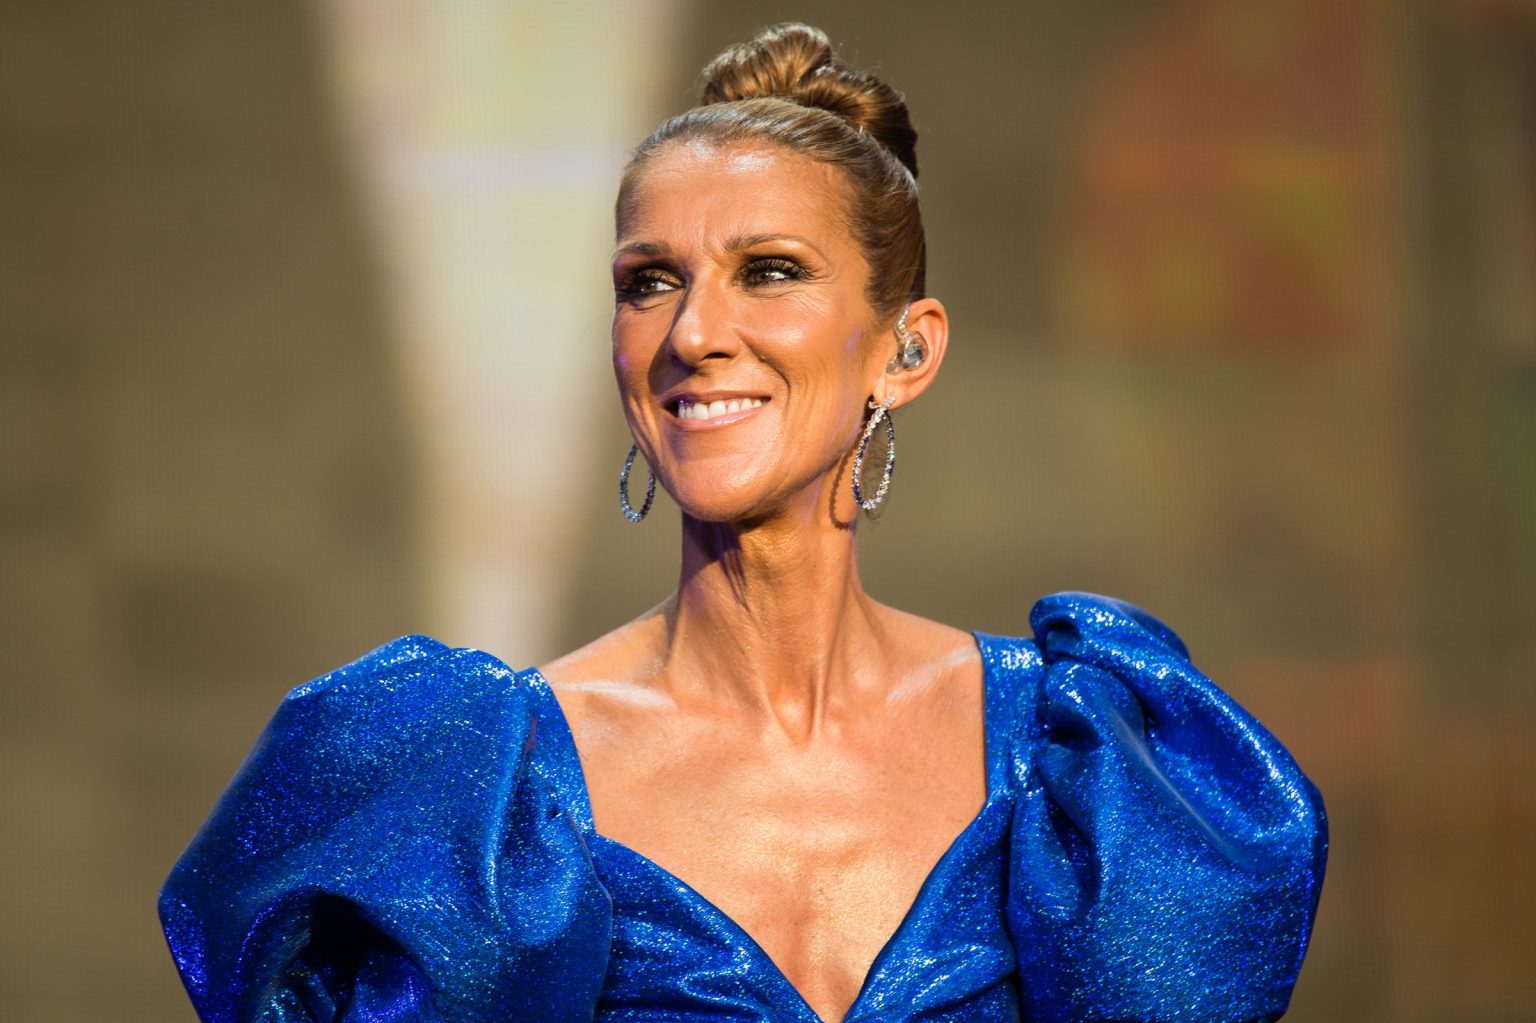 Celine Dion Biography and Net Worth